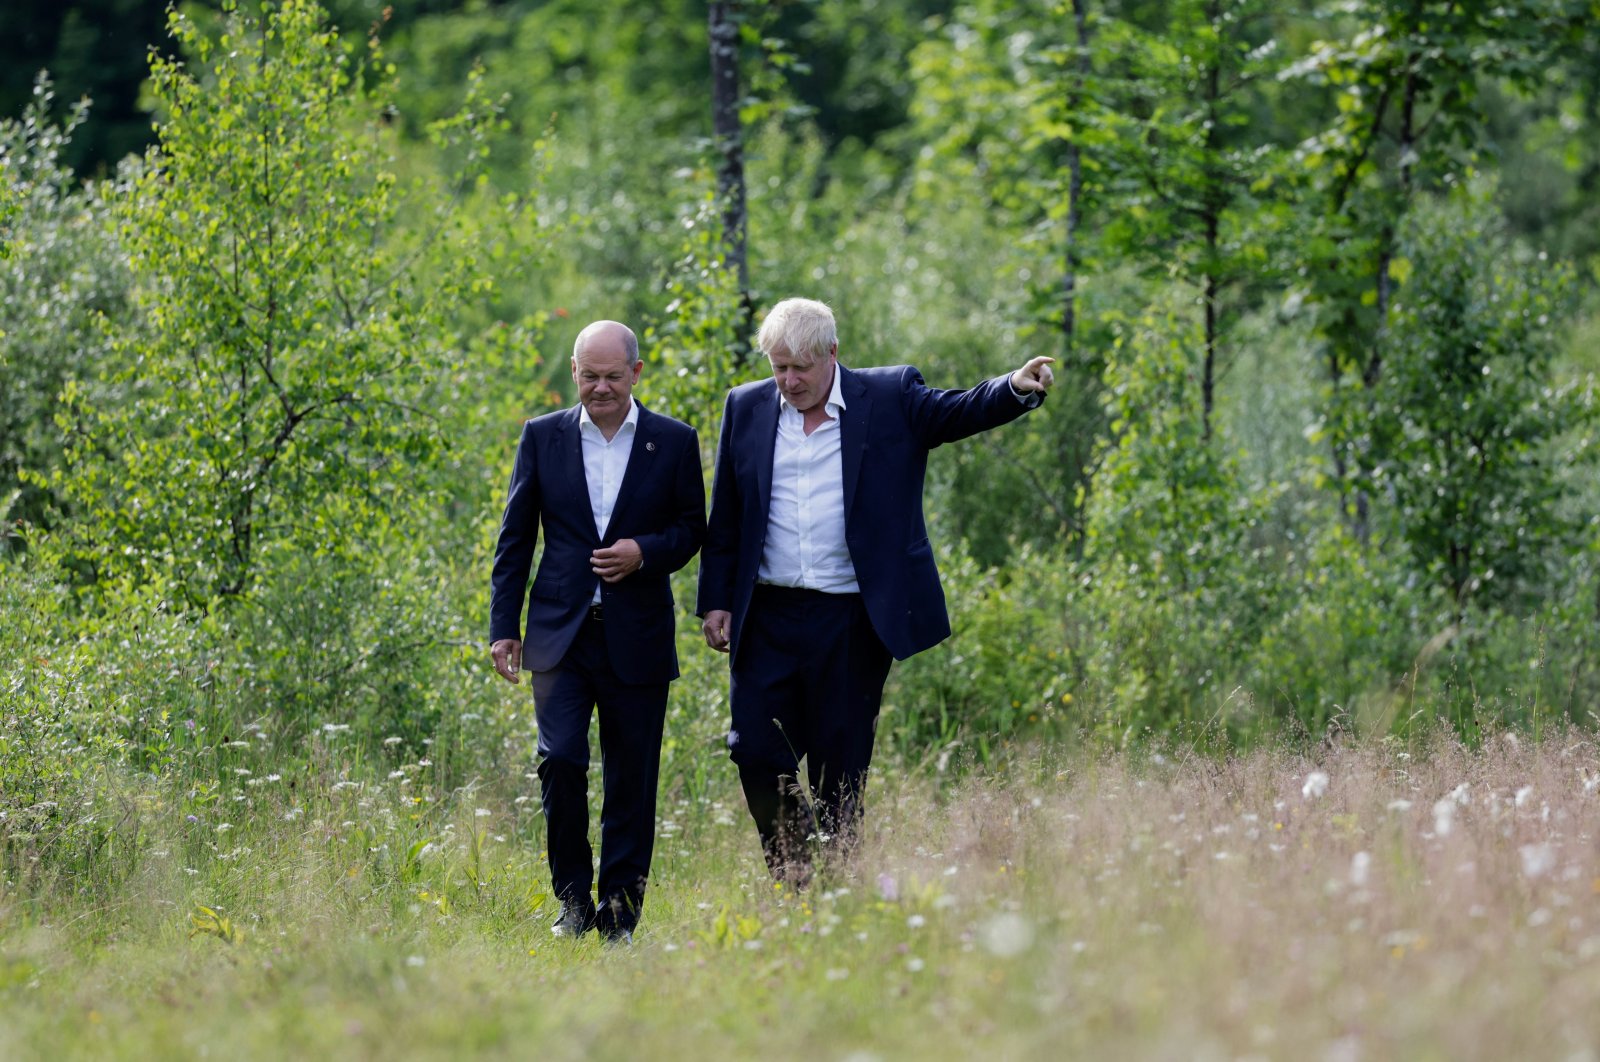 German Chancellor Olaf Scholz (L) and British Prime Minister Boris Johnson walk during a bilateral meeting at Schloss Elmau Castle at the G-7 leader summit in the Bavarian Alps near Garmisch-Partenkirchen, Germany, June 26, 2022. (Reuters Photo)